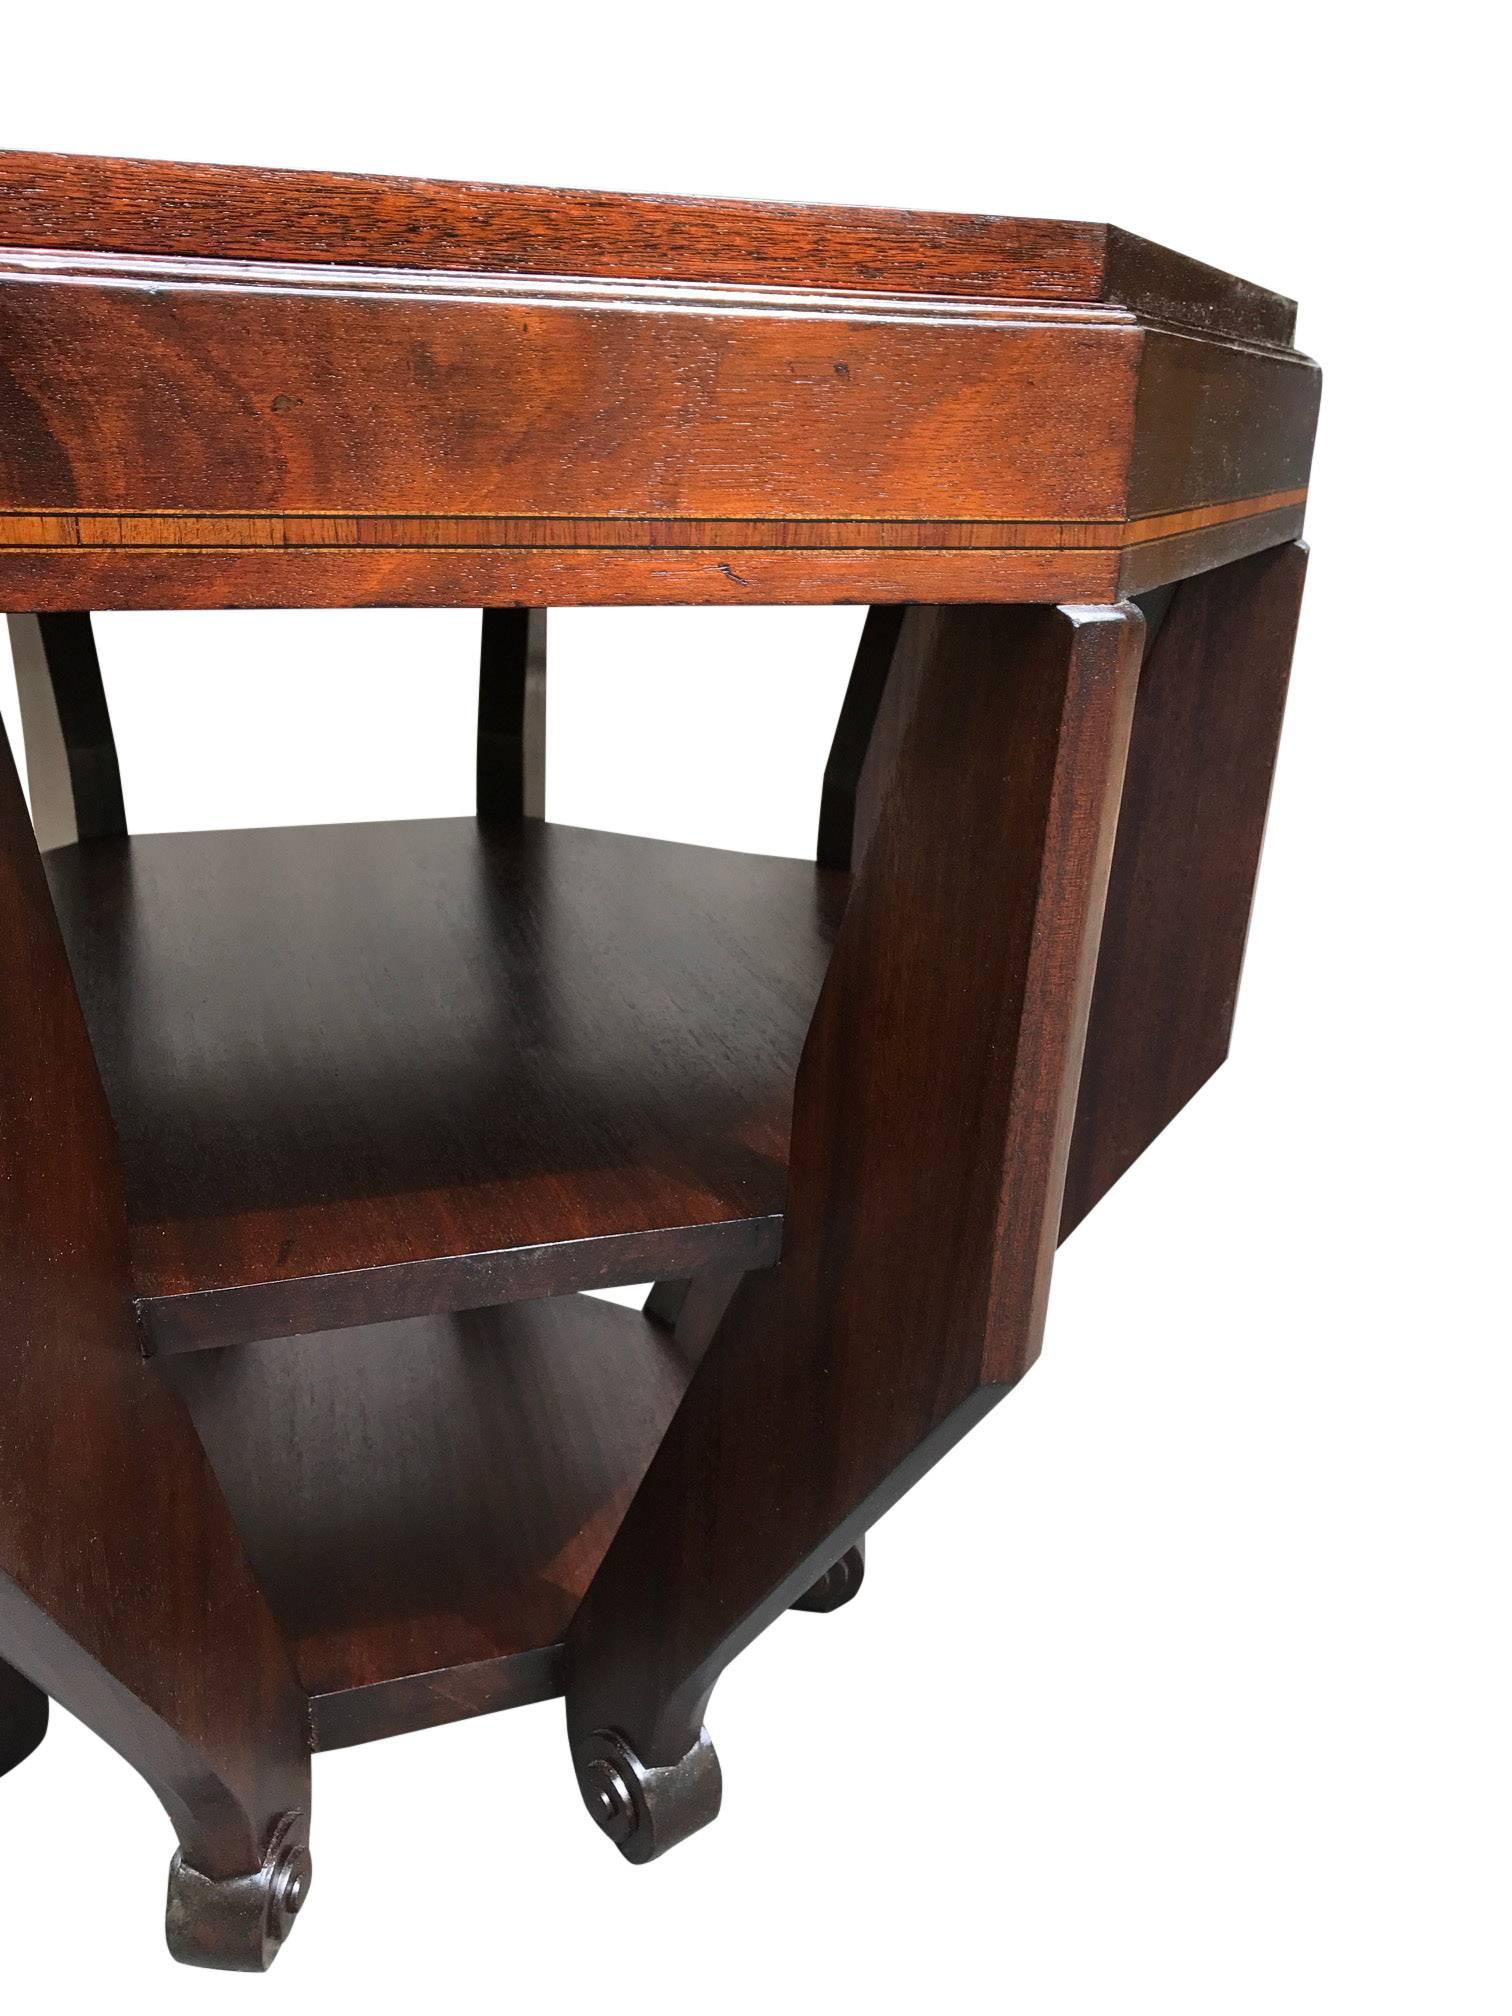 Mid-20th Century French Art Deco Octagonal Table